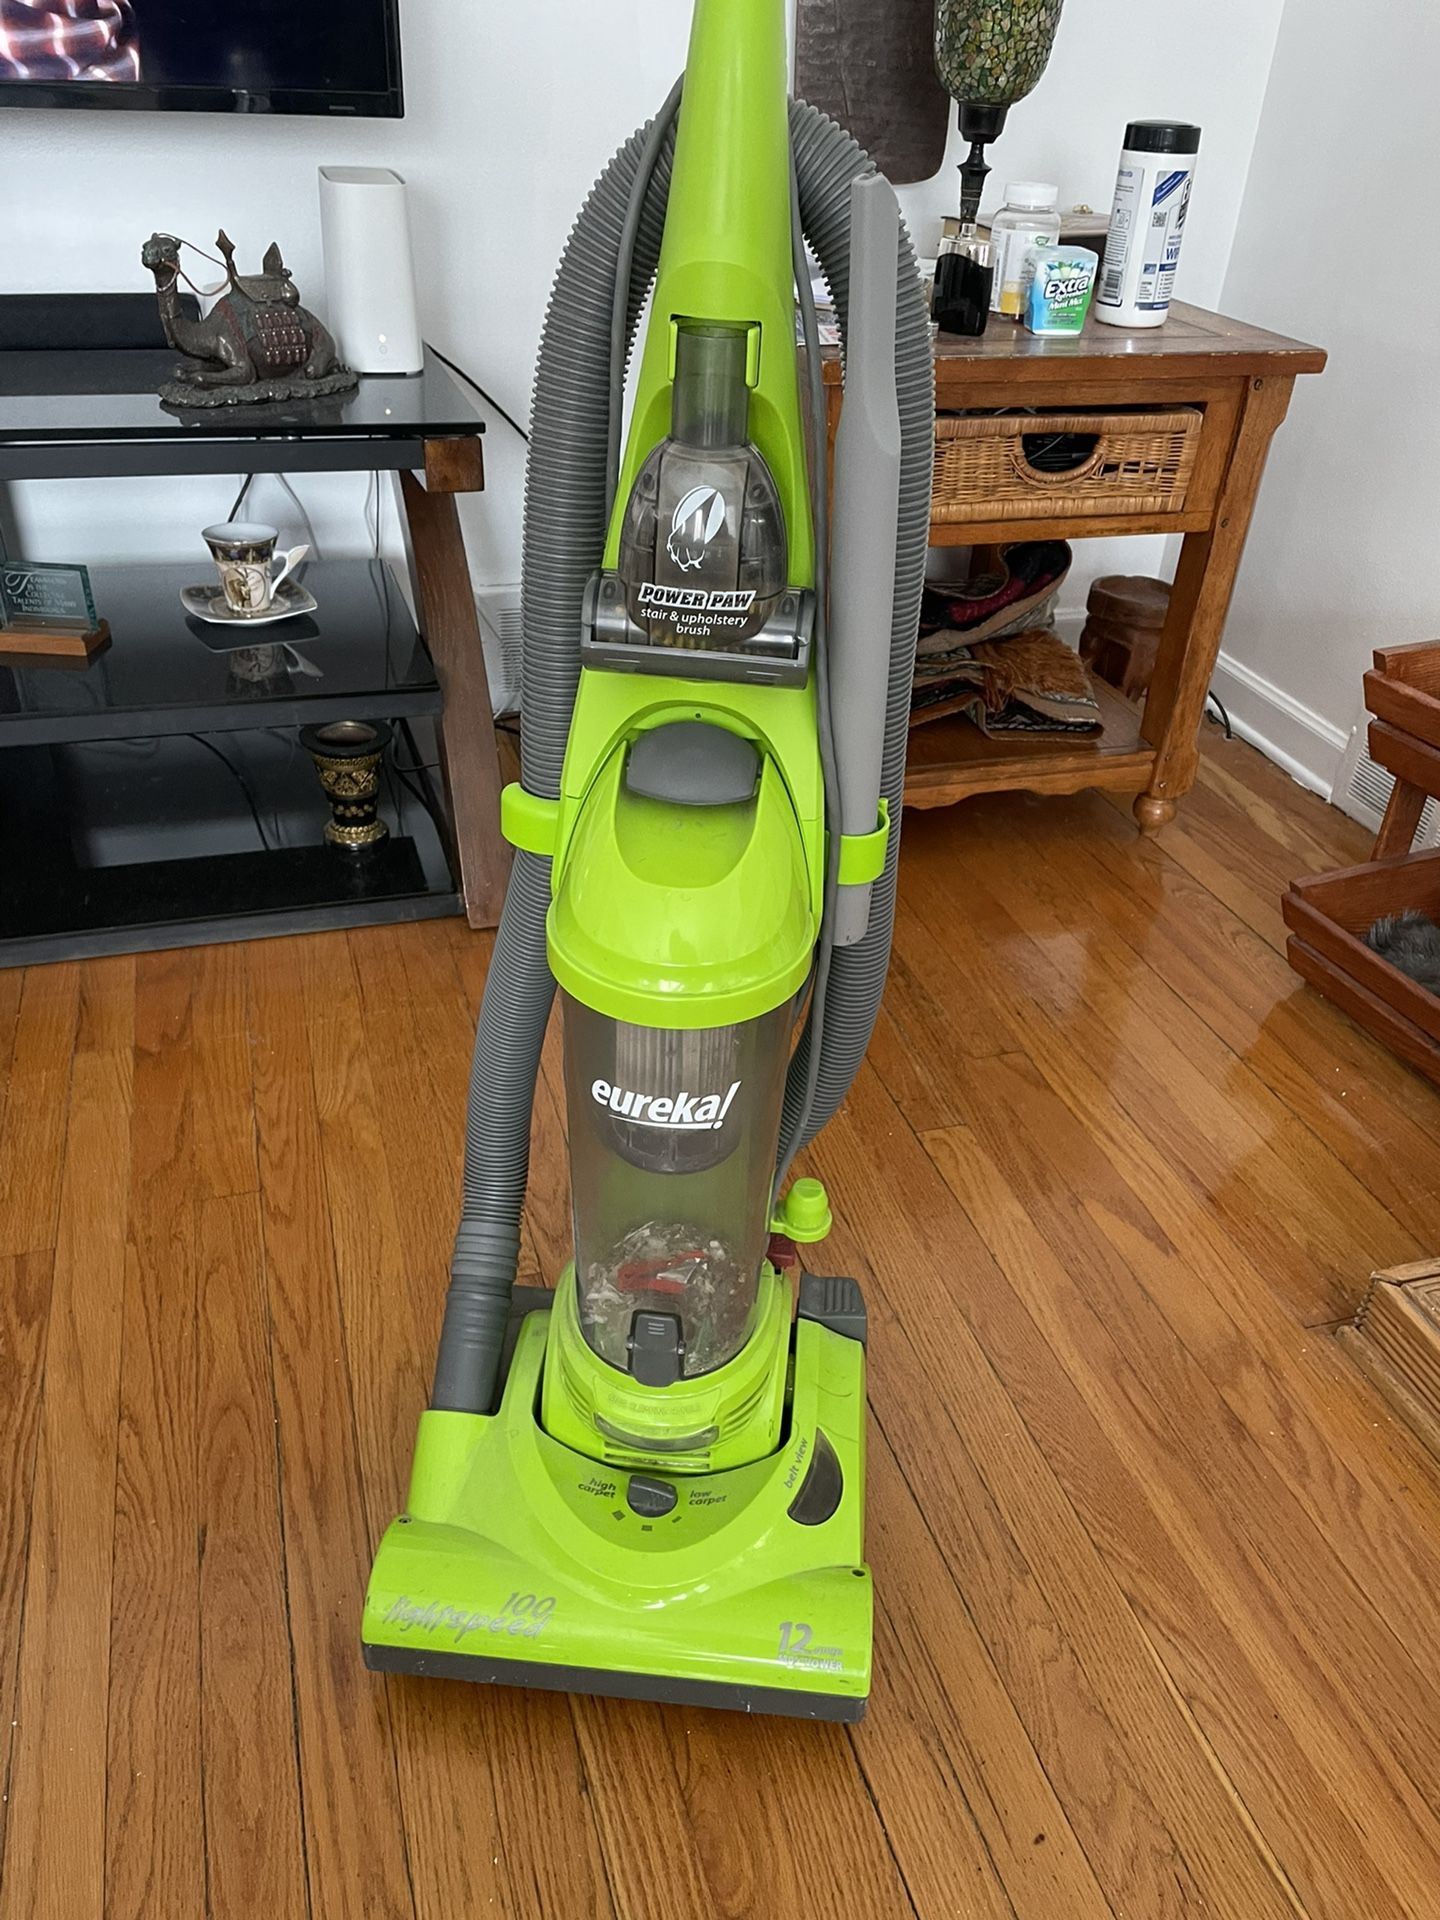 Good condition eureka vacuum cleaner bagless with shown Accesorie 